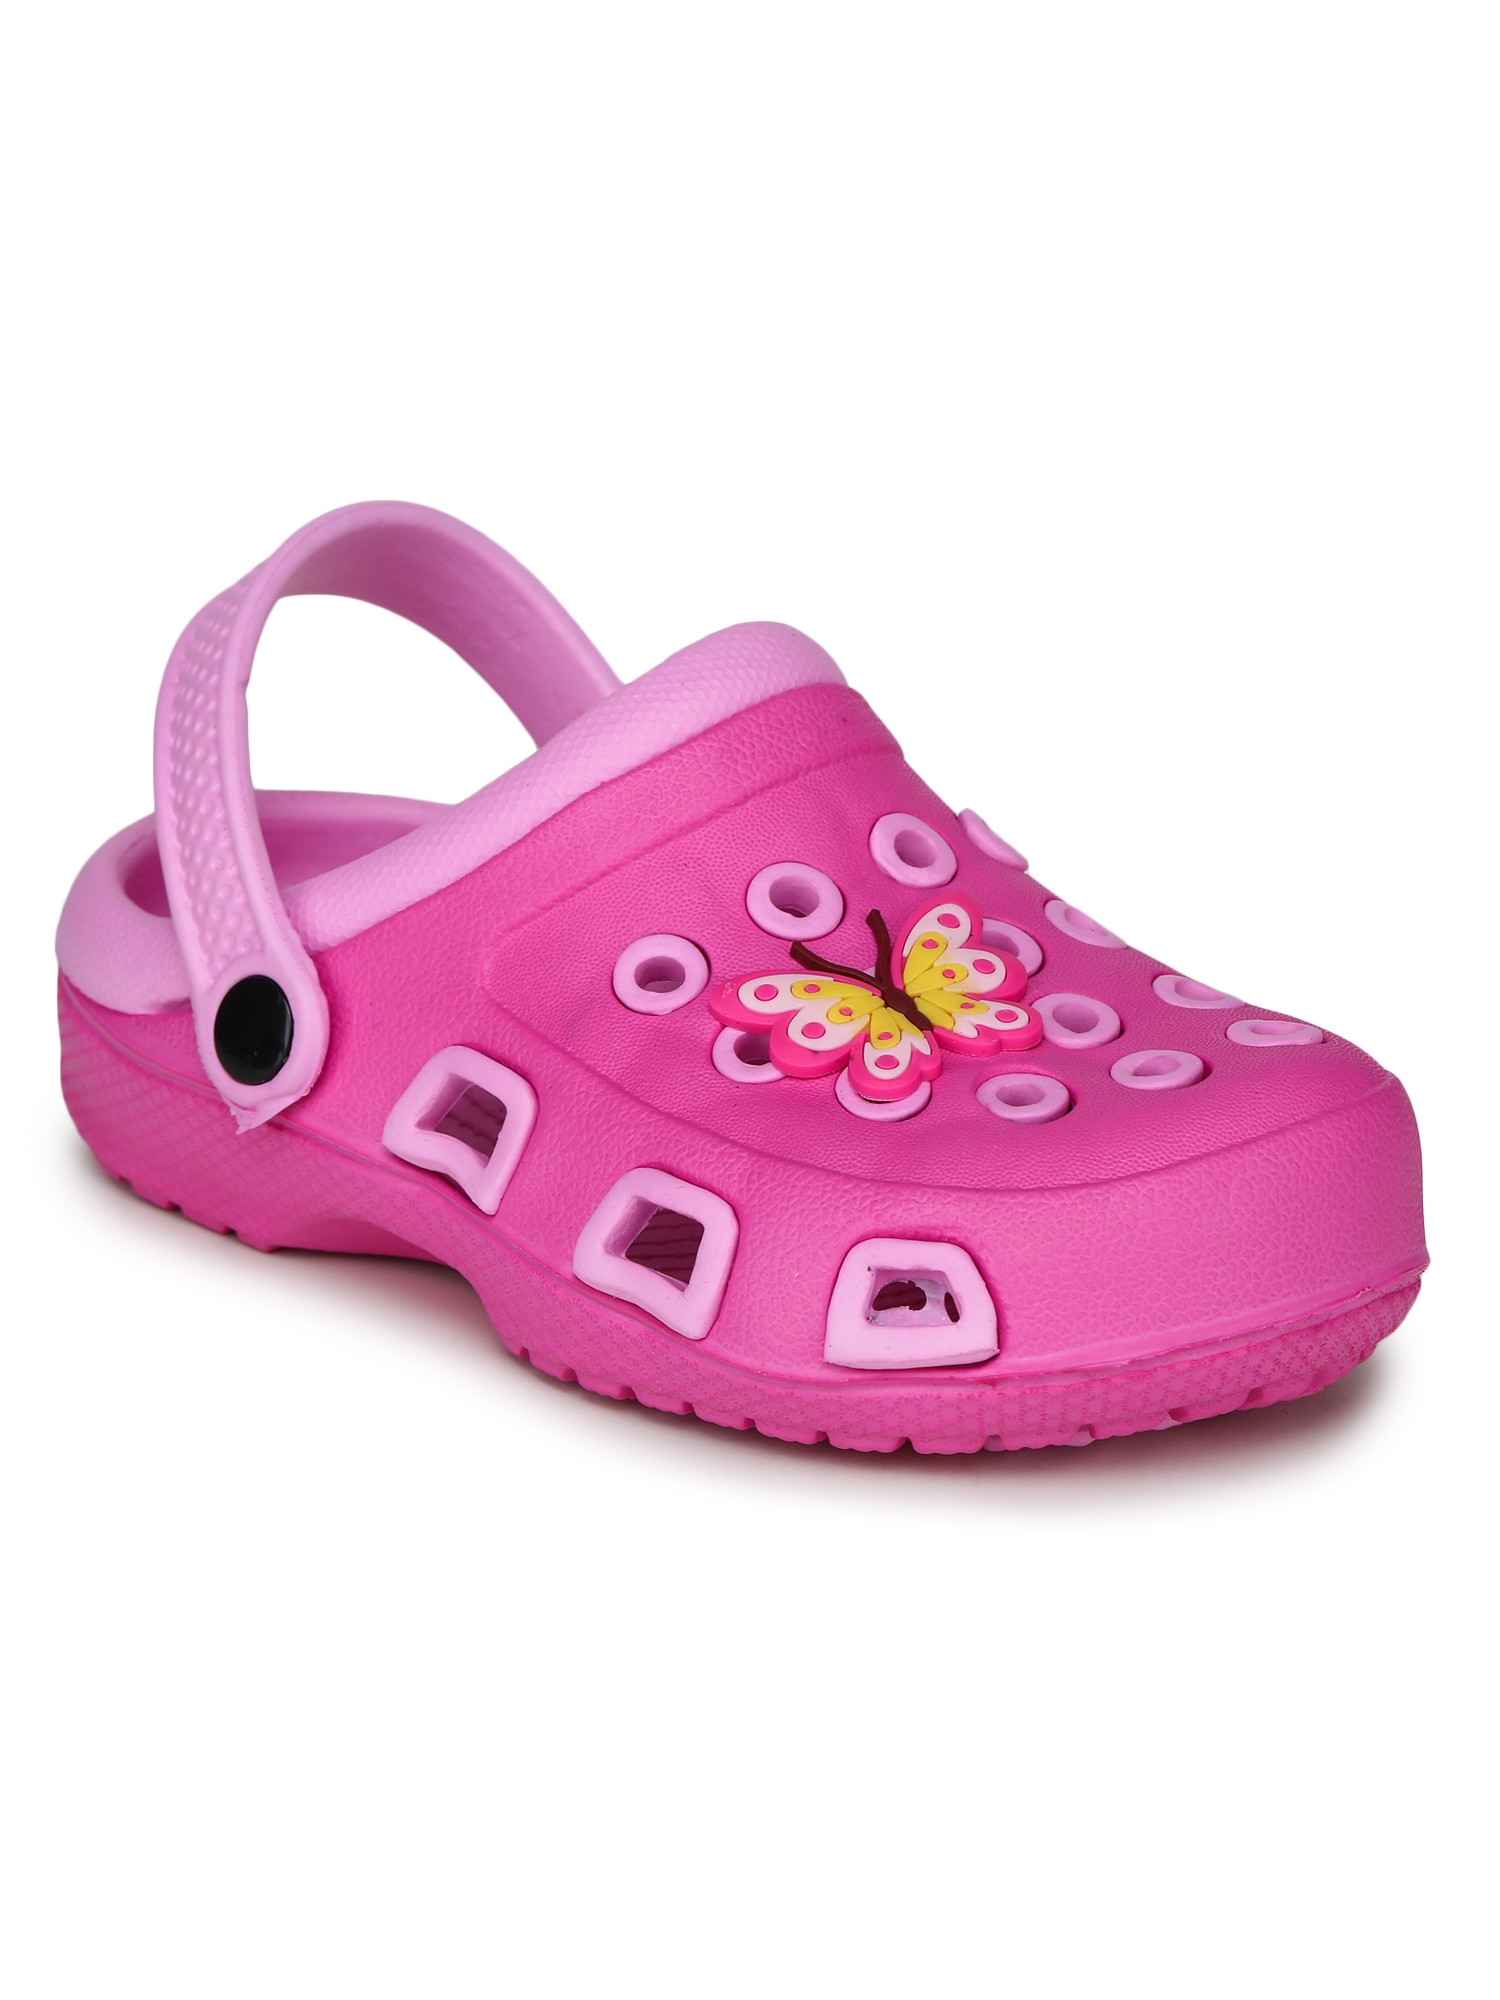 EASY TO GO LIGHT WEIGHT DARKPINK CLOGS FOR BOYS & GIRLS 